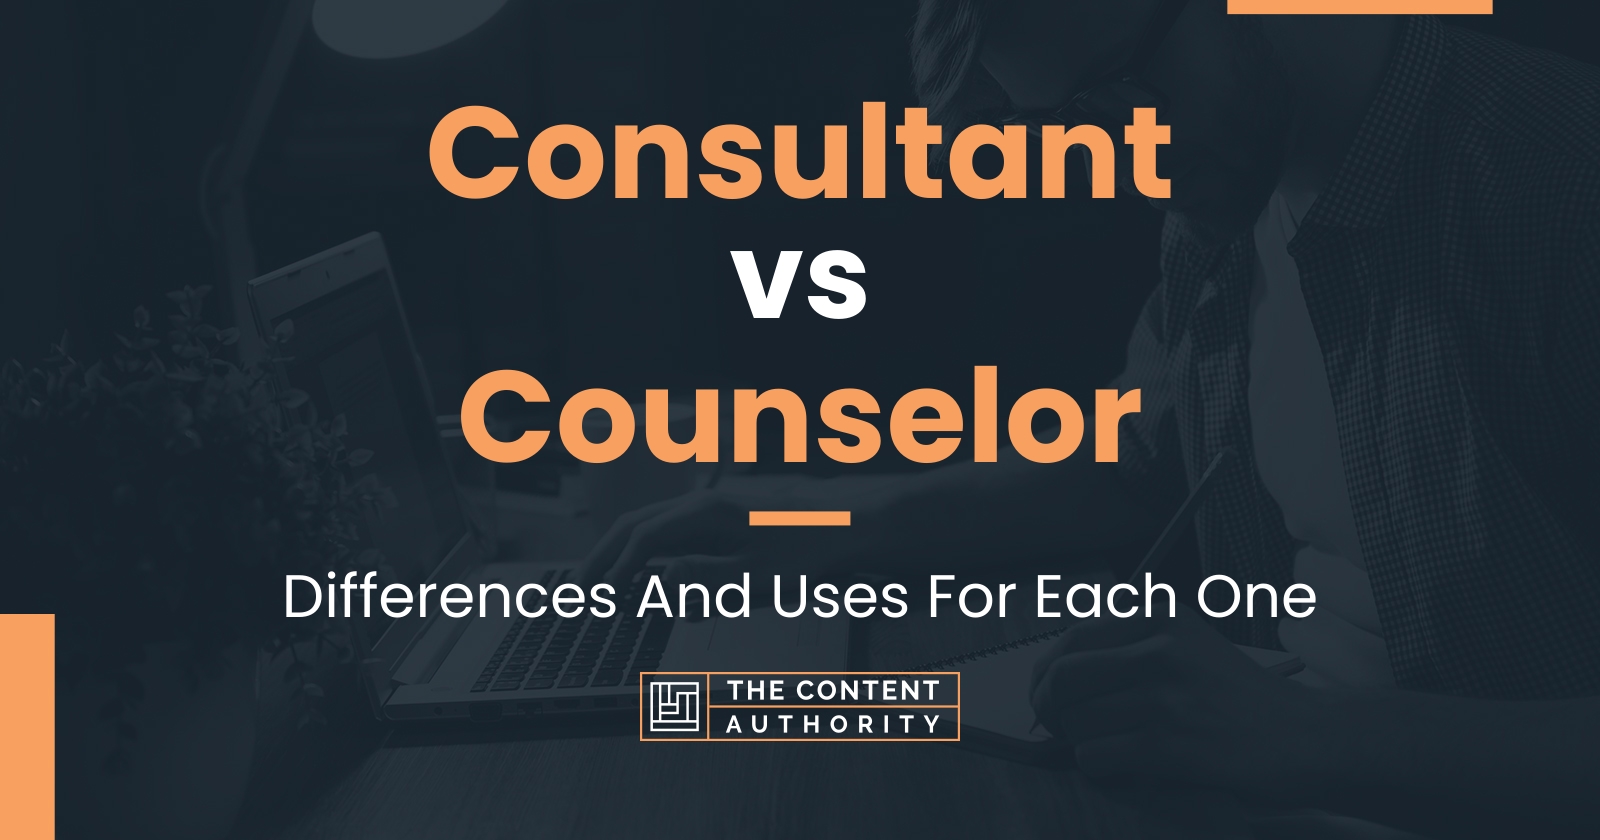 Consultant Vs Counselor Differences And Uses For Each One